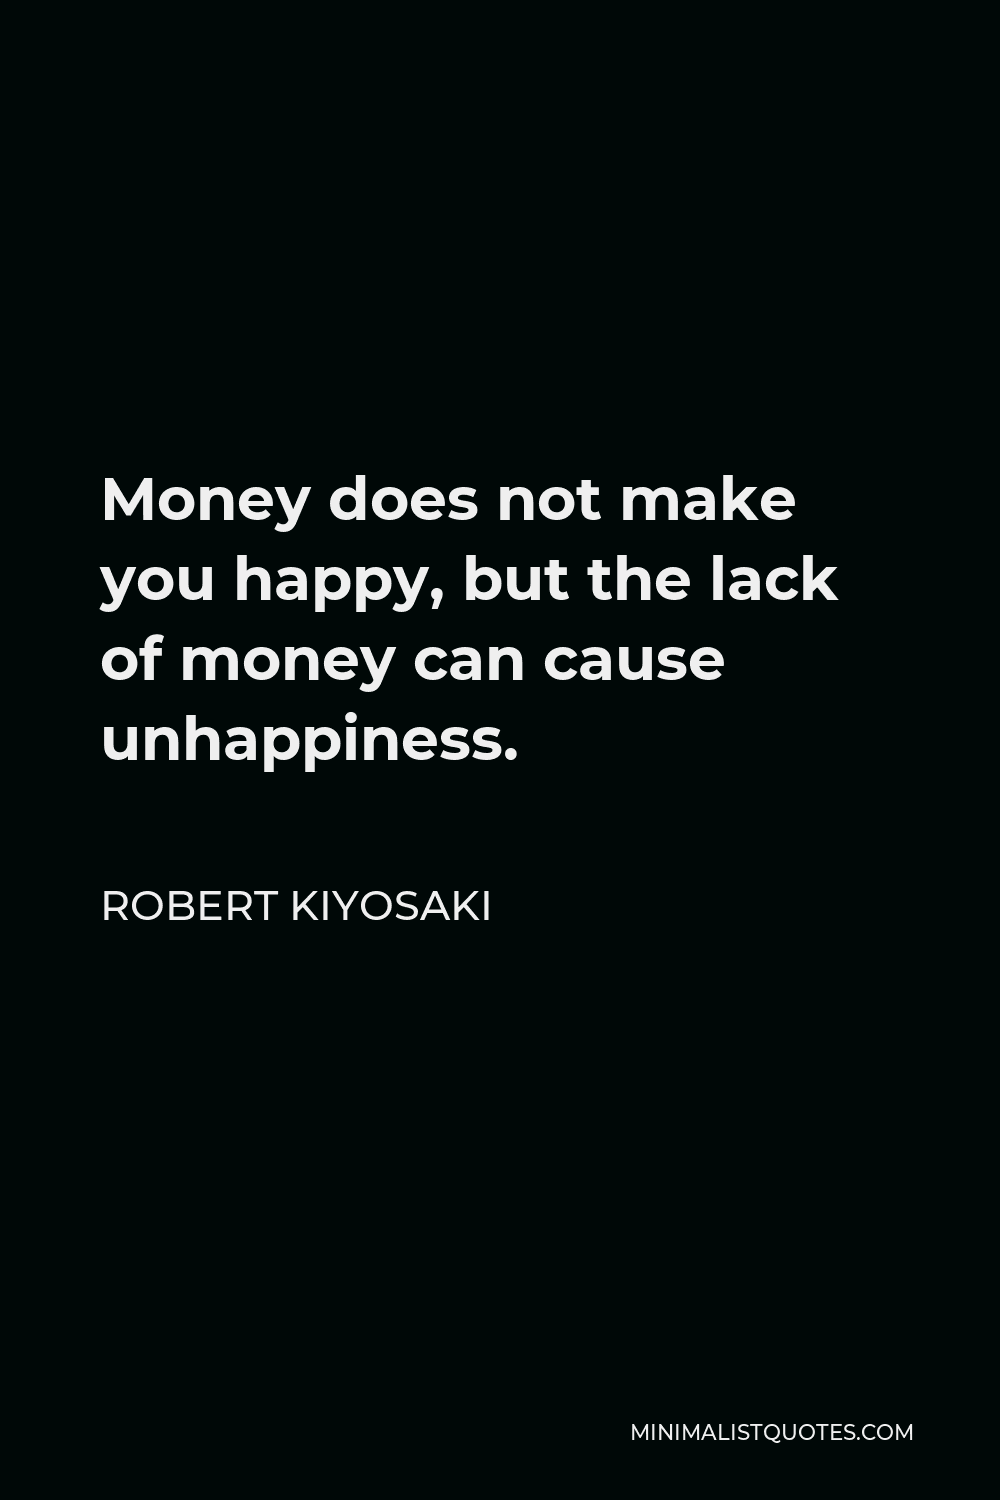 Robert Kiyosaki Quote - Money does not make you happy, but the lack of money can cause unhappiness.